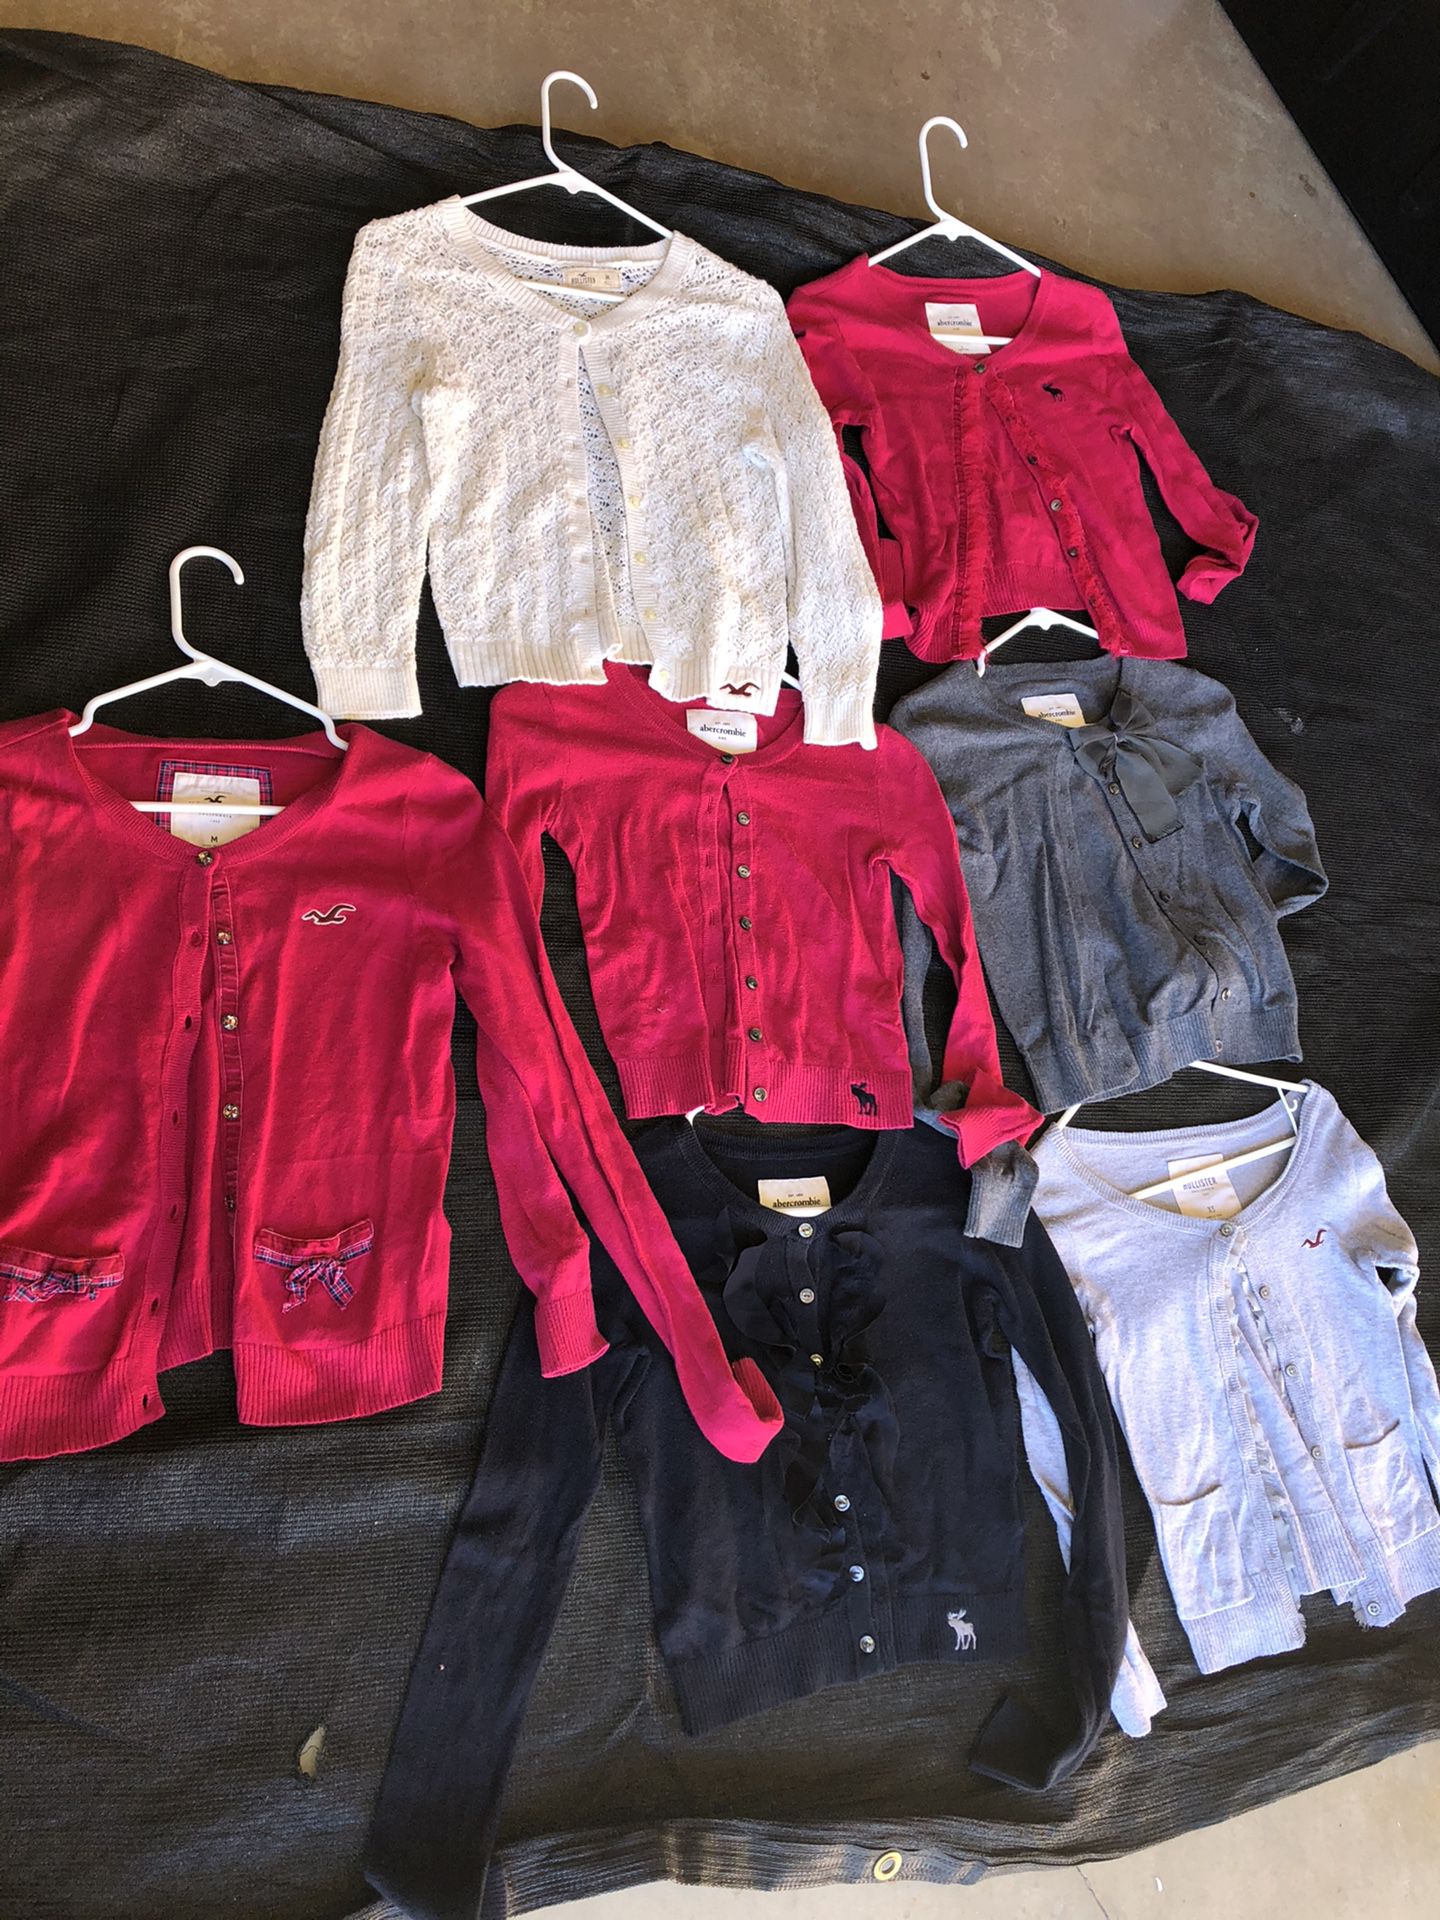 Hollister clothes for kids size S-M